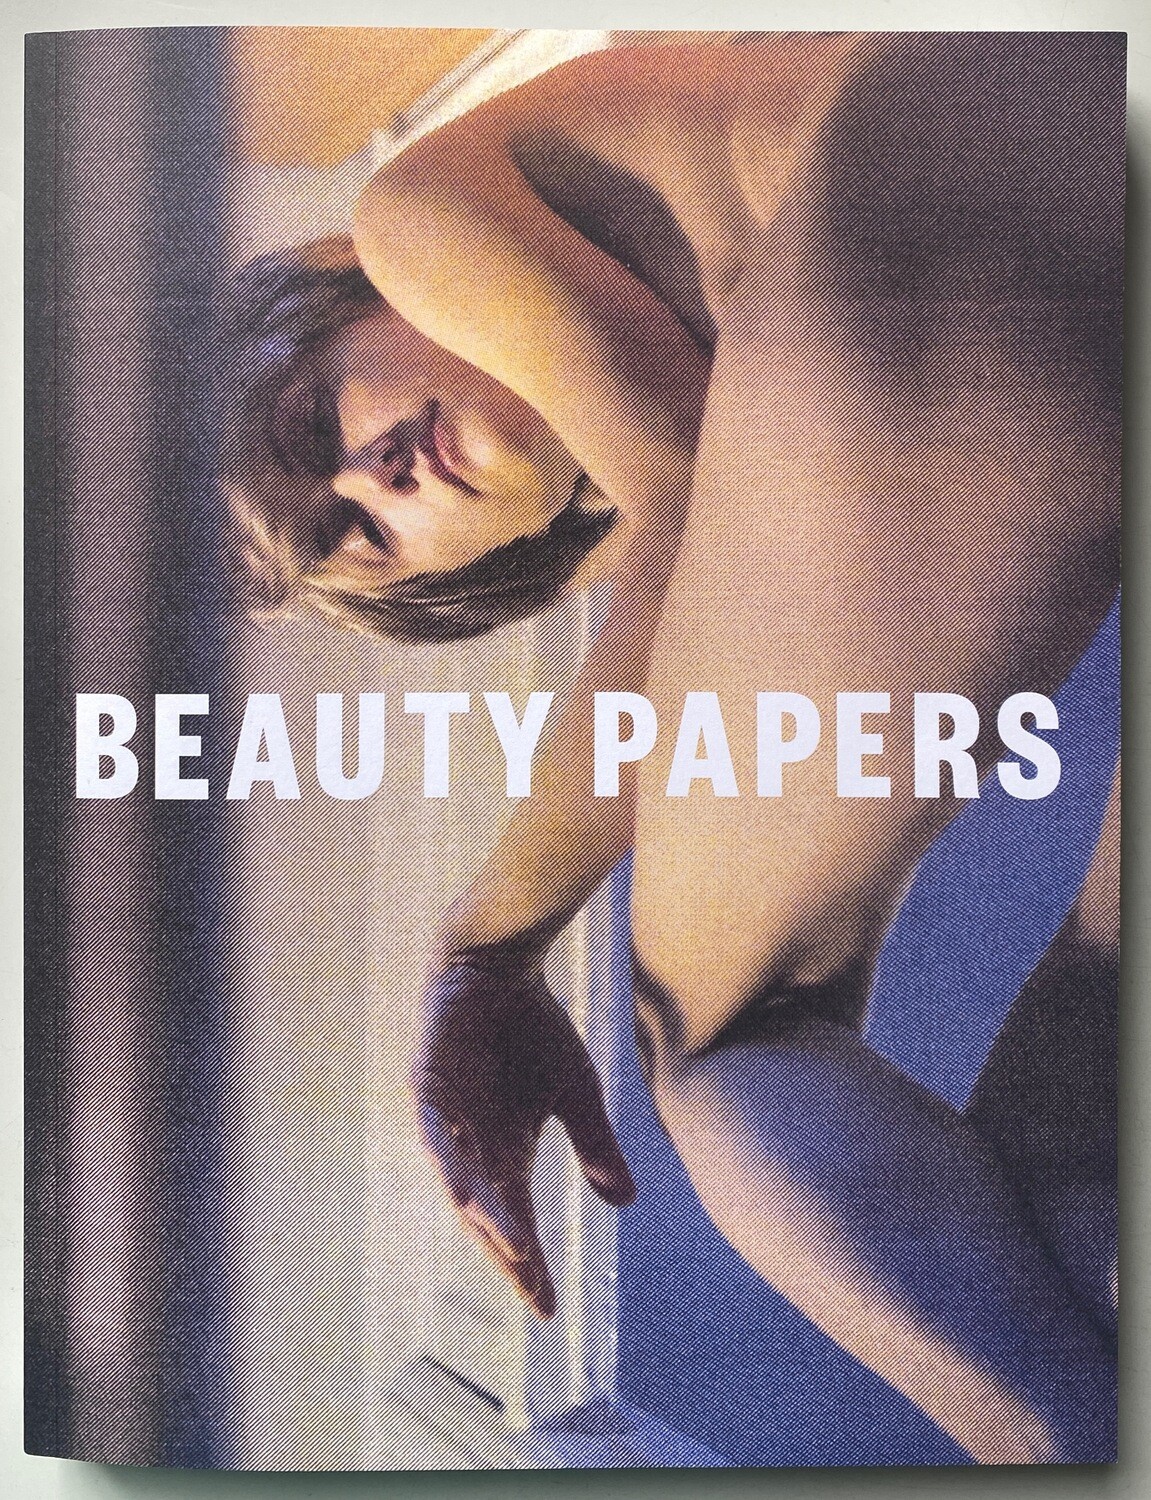 Beauty Papers Collier Schorr Exclusive